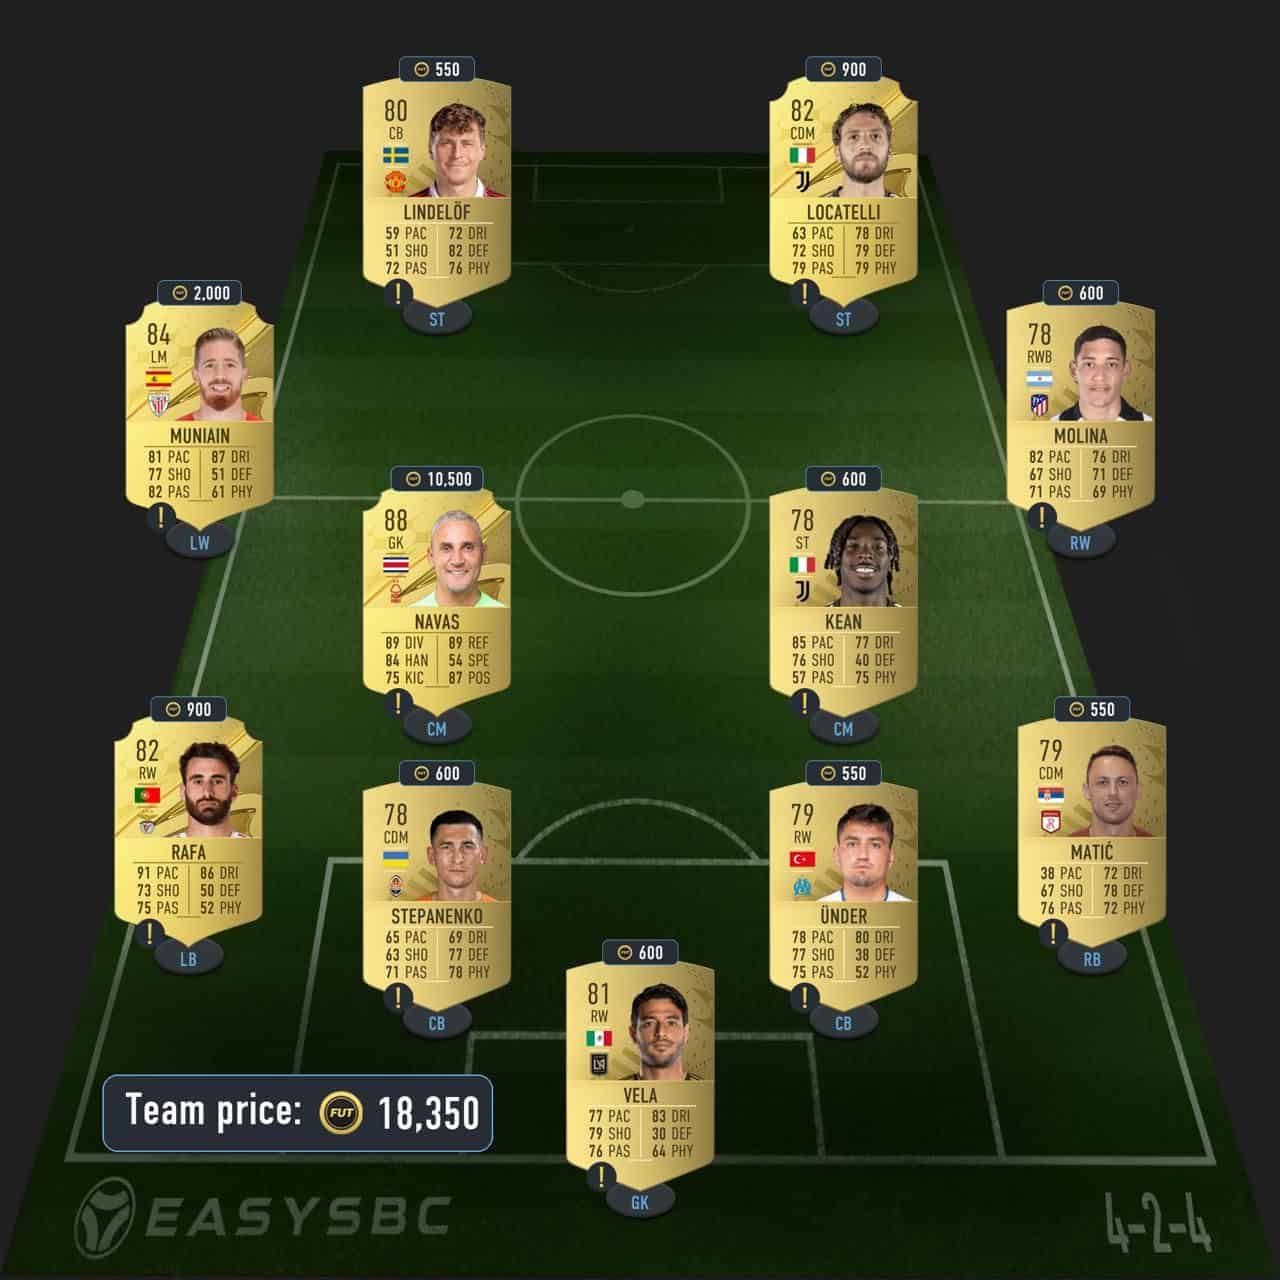 rooney cover star icon sbc solution fifa 23 on a loan